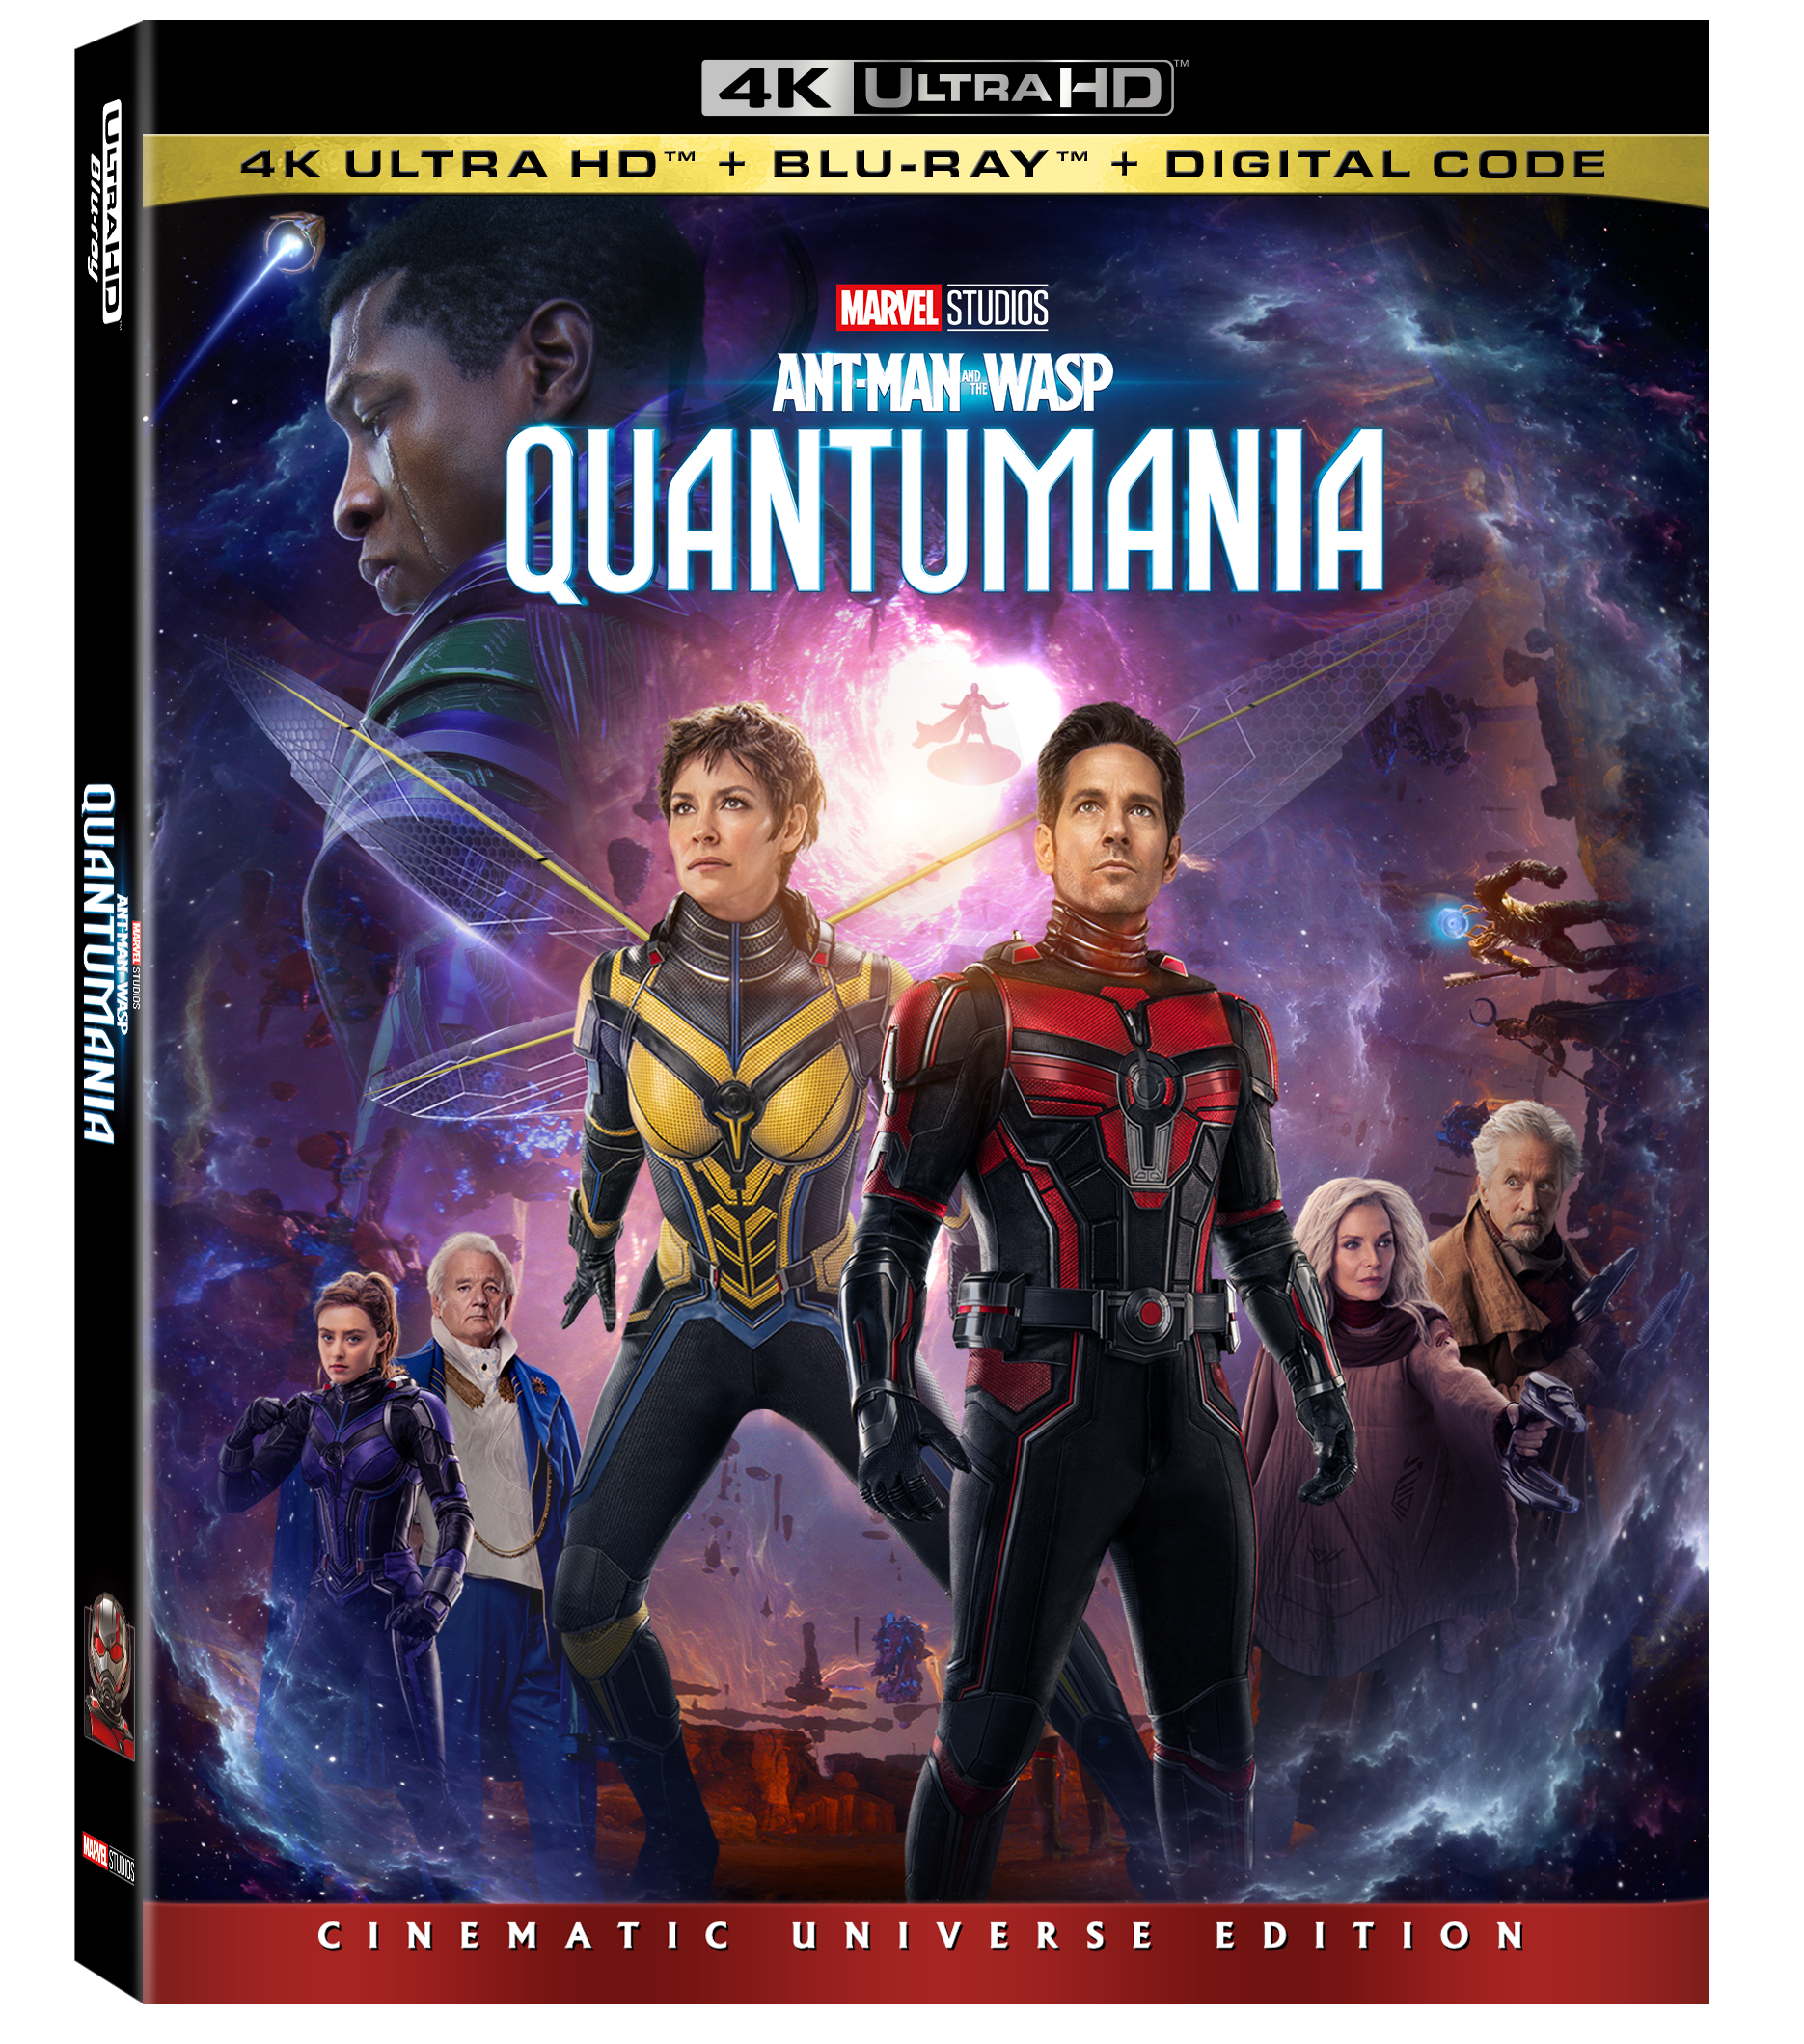 ant-man-the-wasp-quantumania-blu-ray-dvd-4k-ultra-hd-and-digital-AntManAndTheWasp-Quantumania_...png